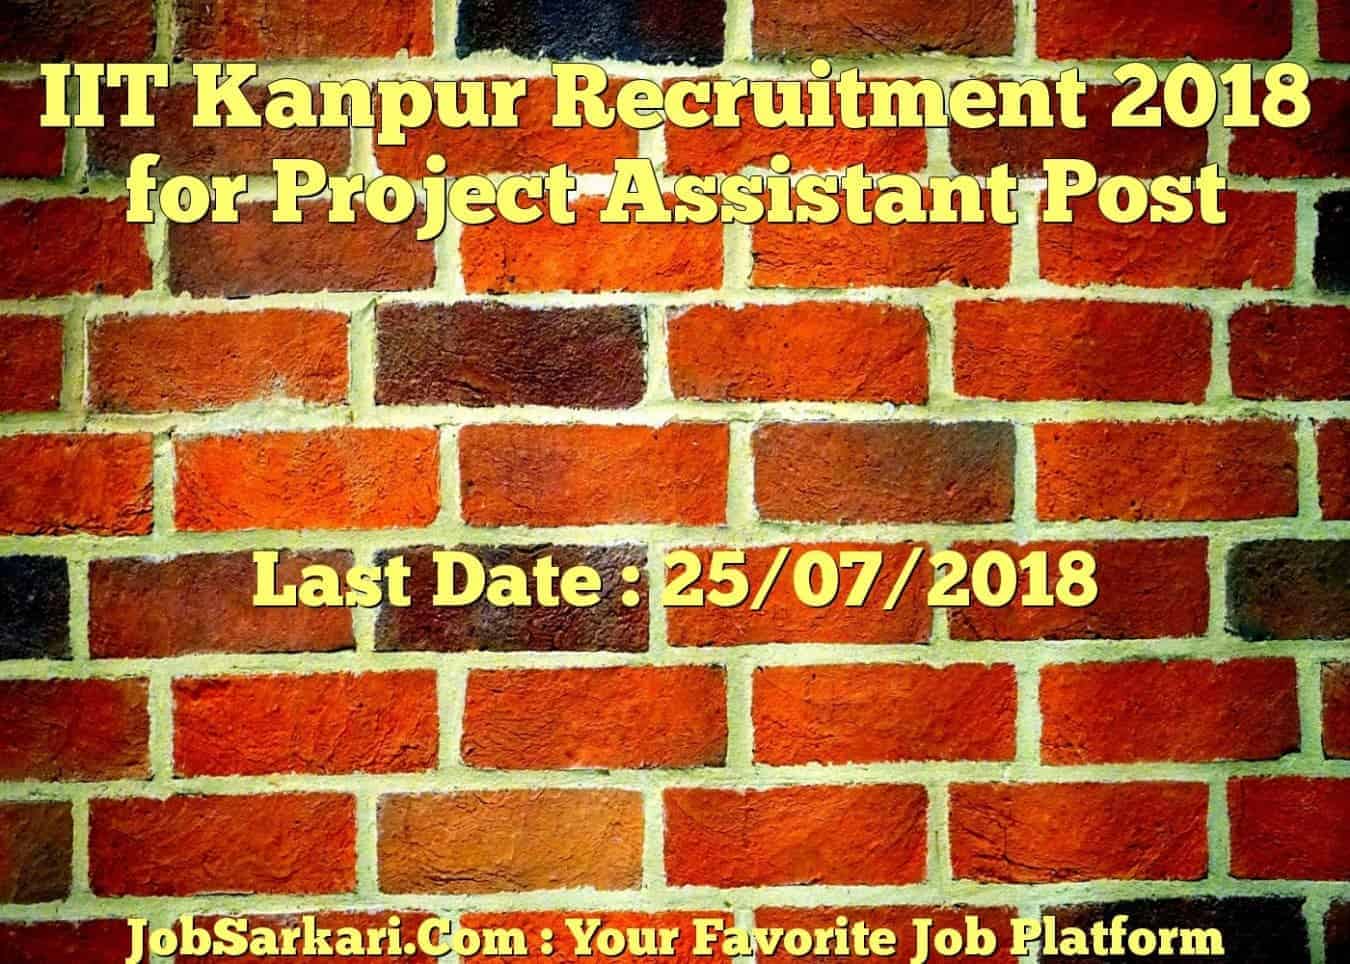 IIT Kanpur Recruitment 2018 for Project Assistant Post